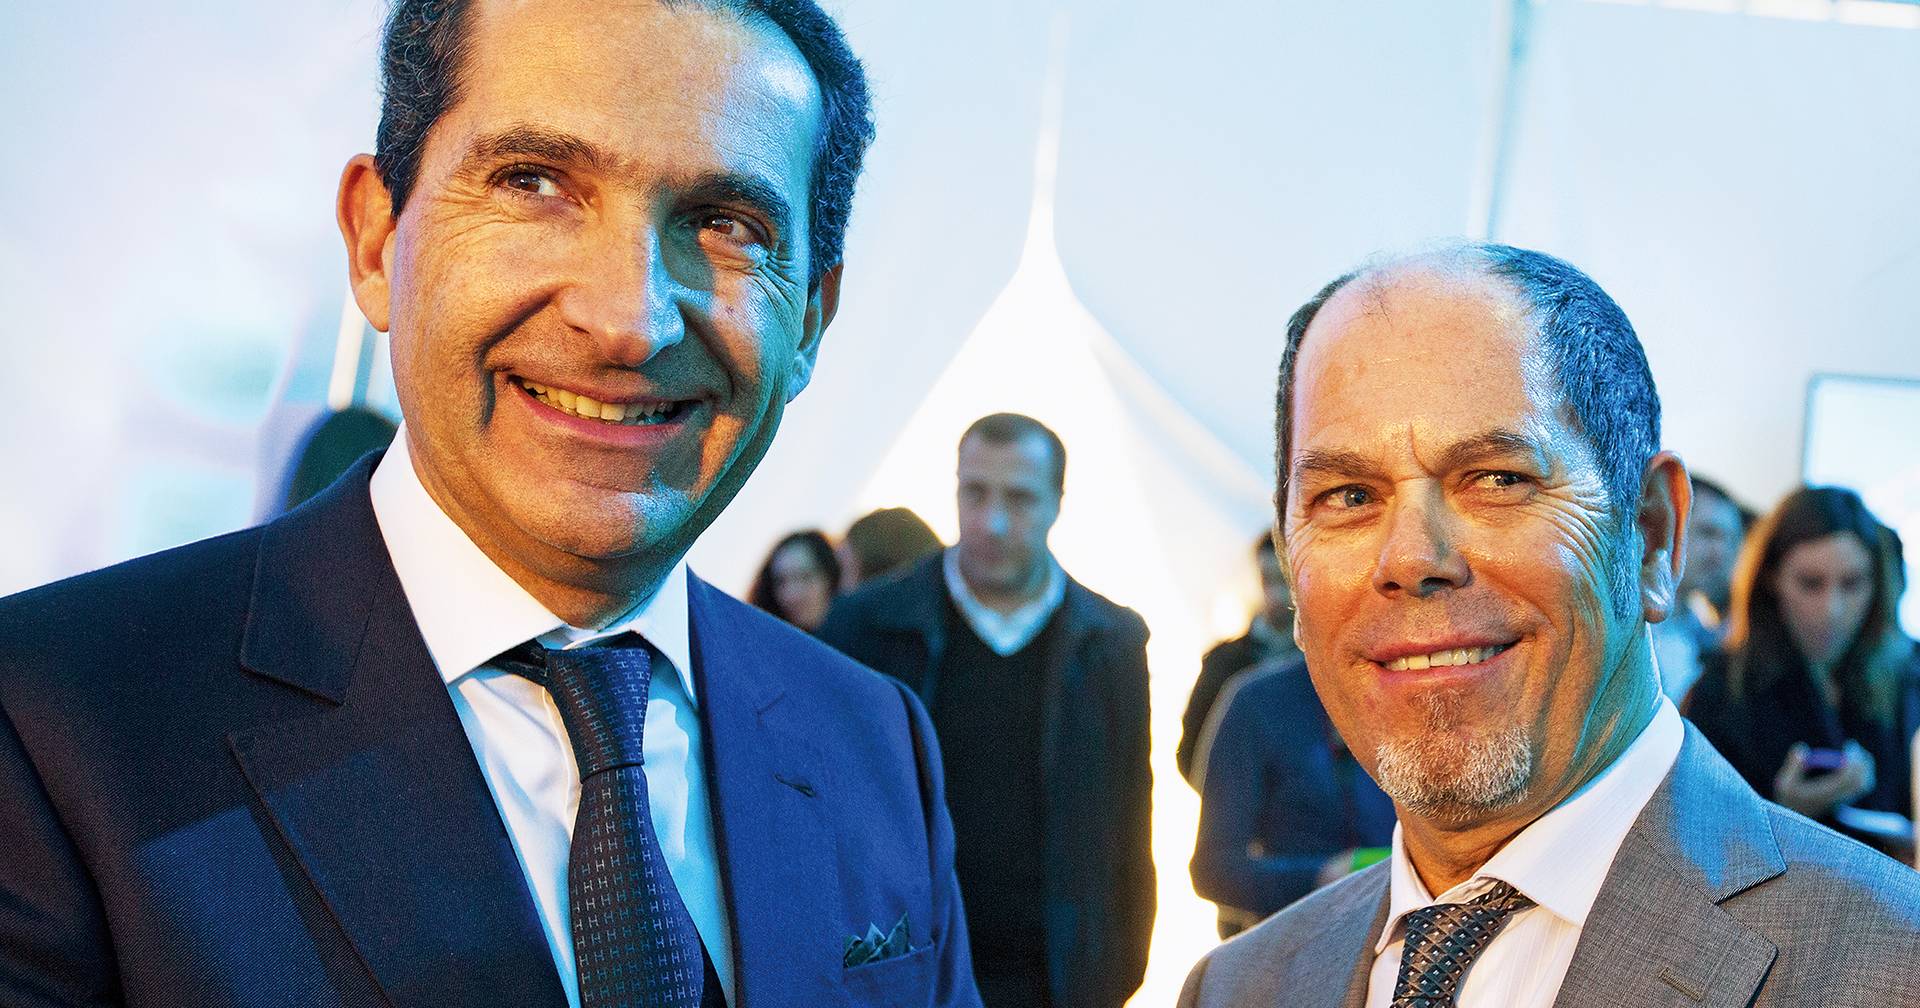 The Picoas process leads to the sale of assets in Altice